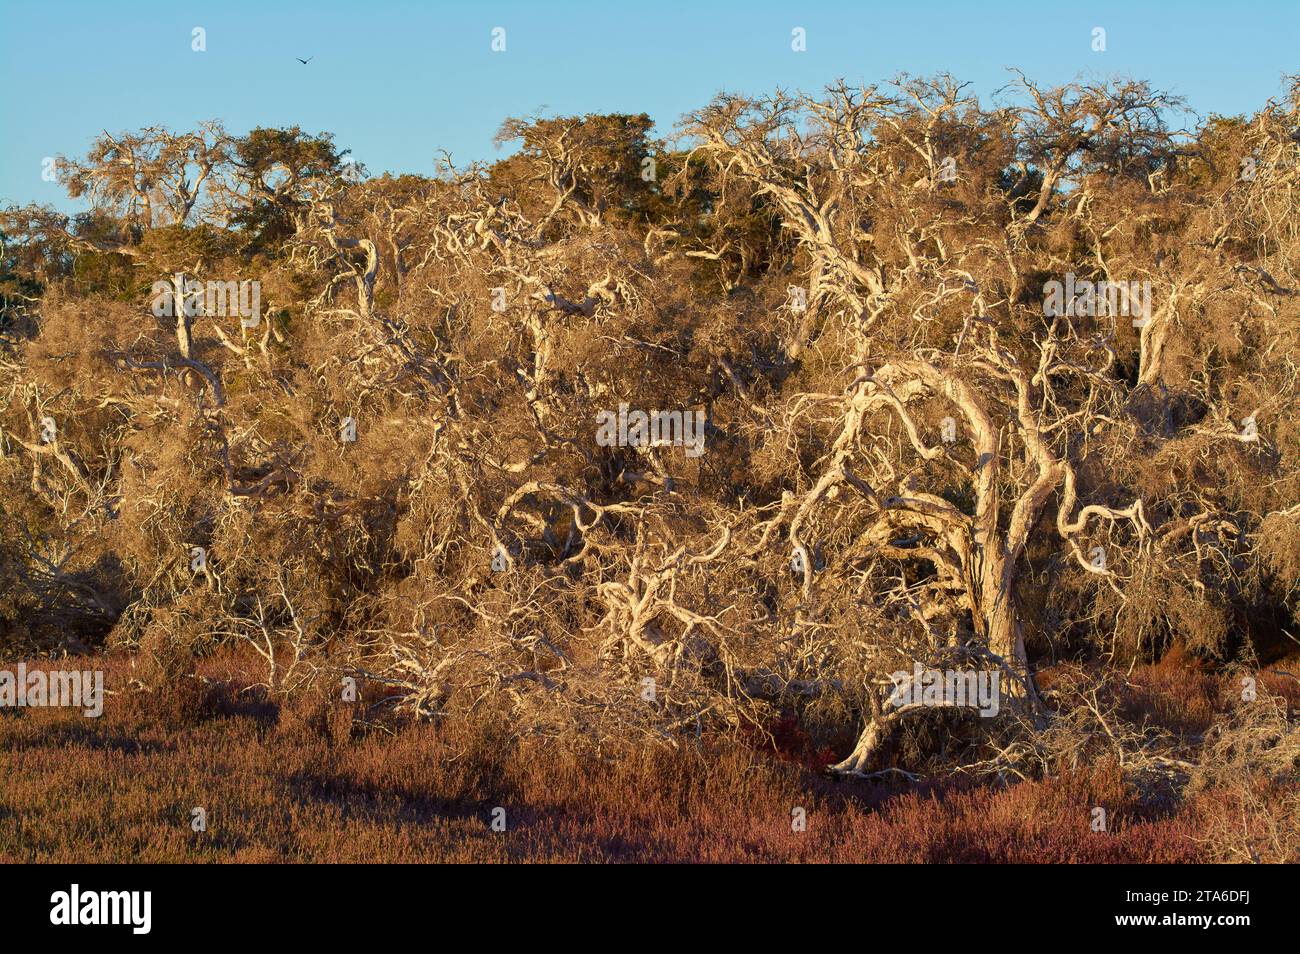 The twisted, gnarled forms of Saltwater Paperbark trees, Melaleuca cuticularis, growing amongst samphire plants, Lake Coogee, Perth, Western Australia Stock Photo